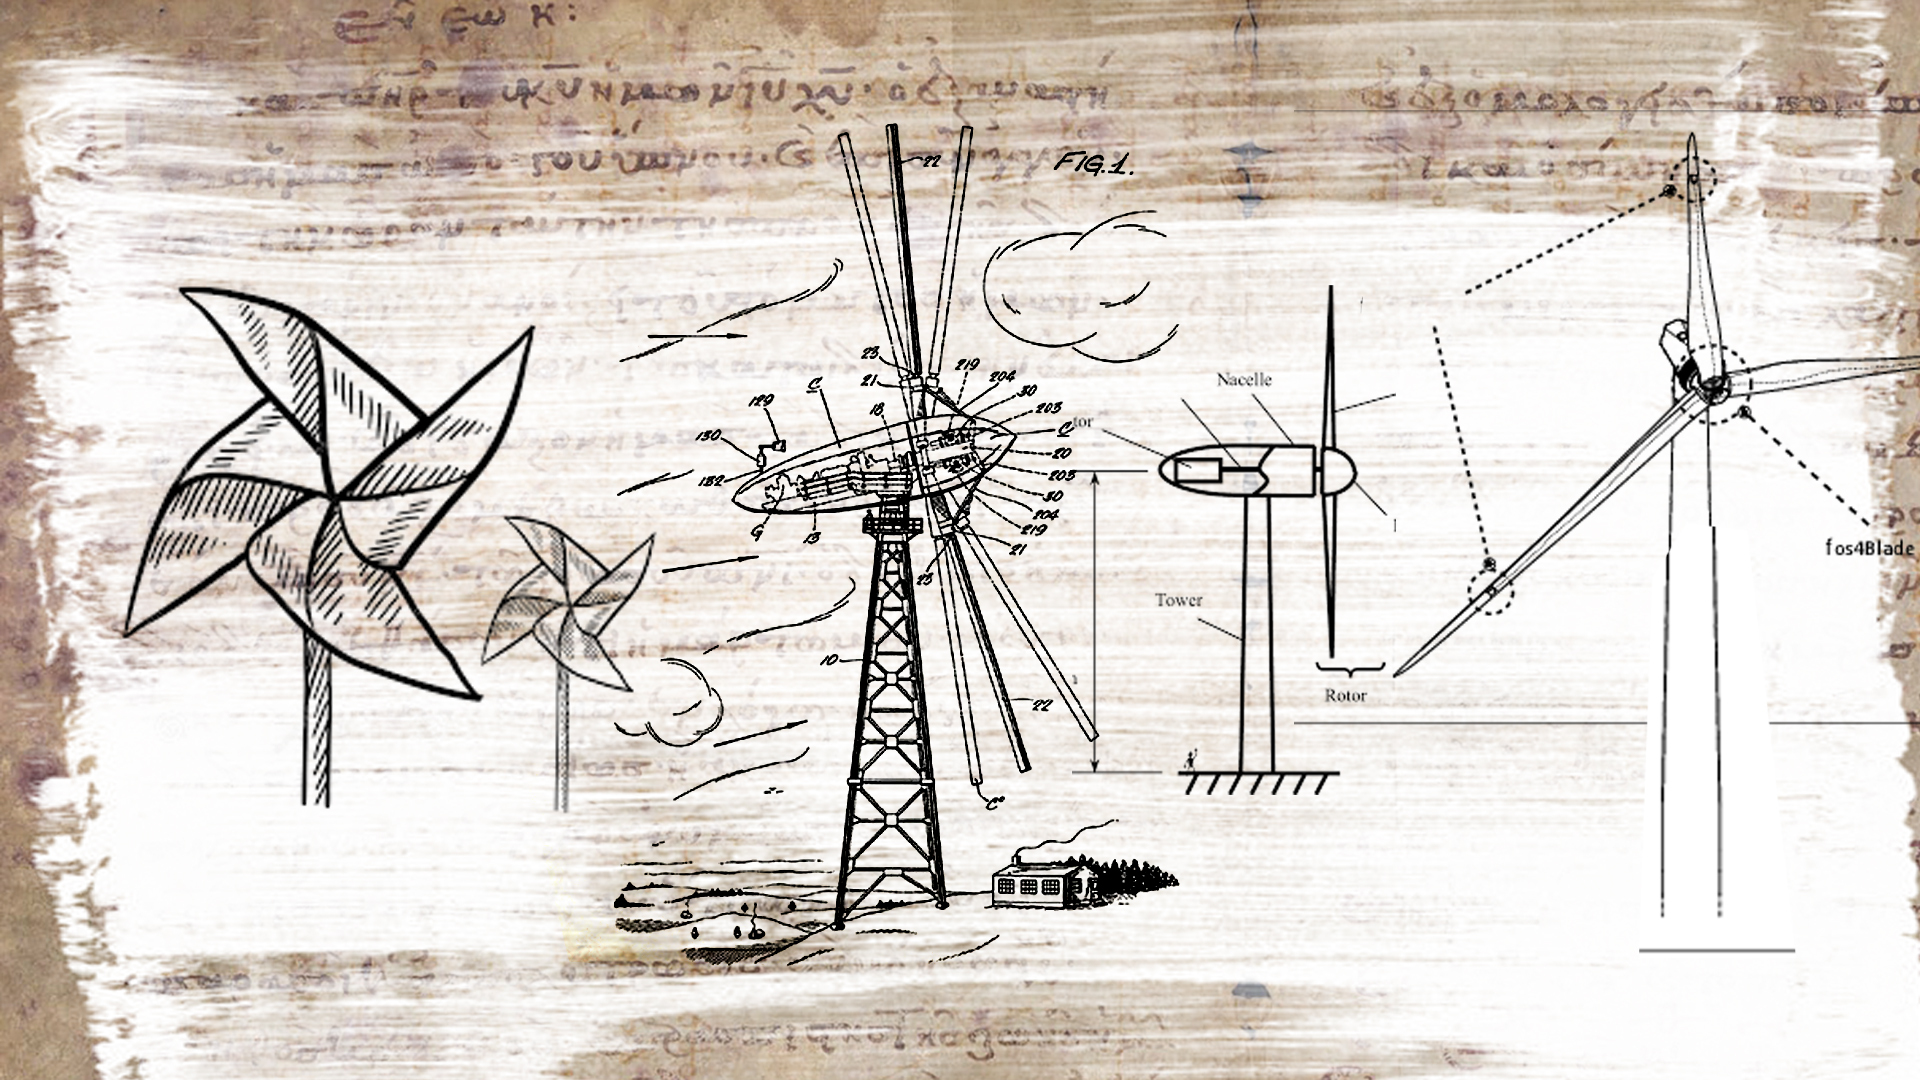 A selection of engineering sketches of successive generations of wind turbines, starting from a child's windmill, illustrating upcycling, as a metaphor for content upcycling.